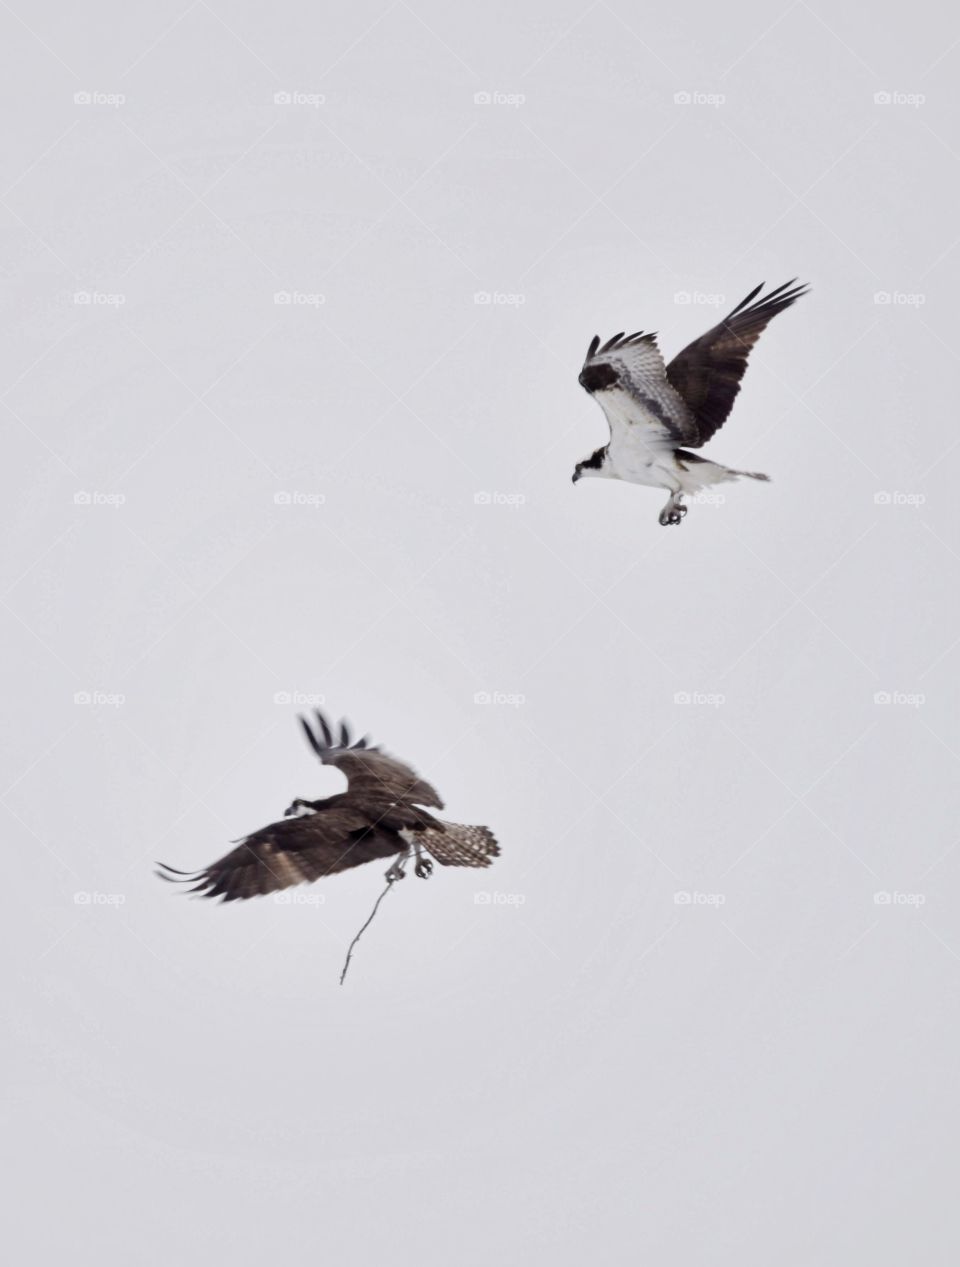 Osprey pair during nesting season working on their nest while flying with sticks.